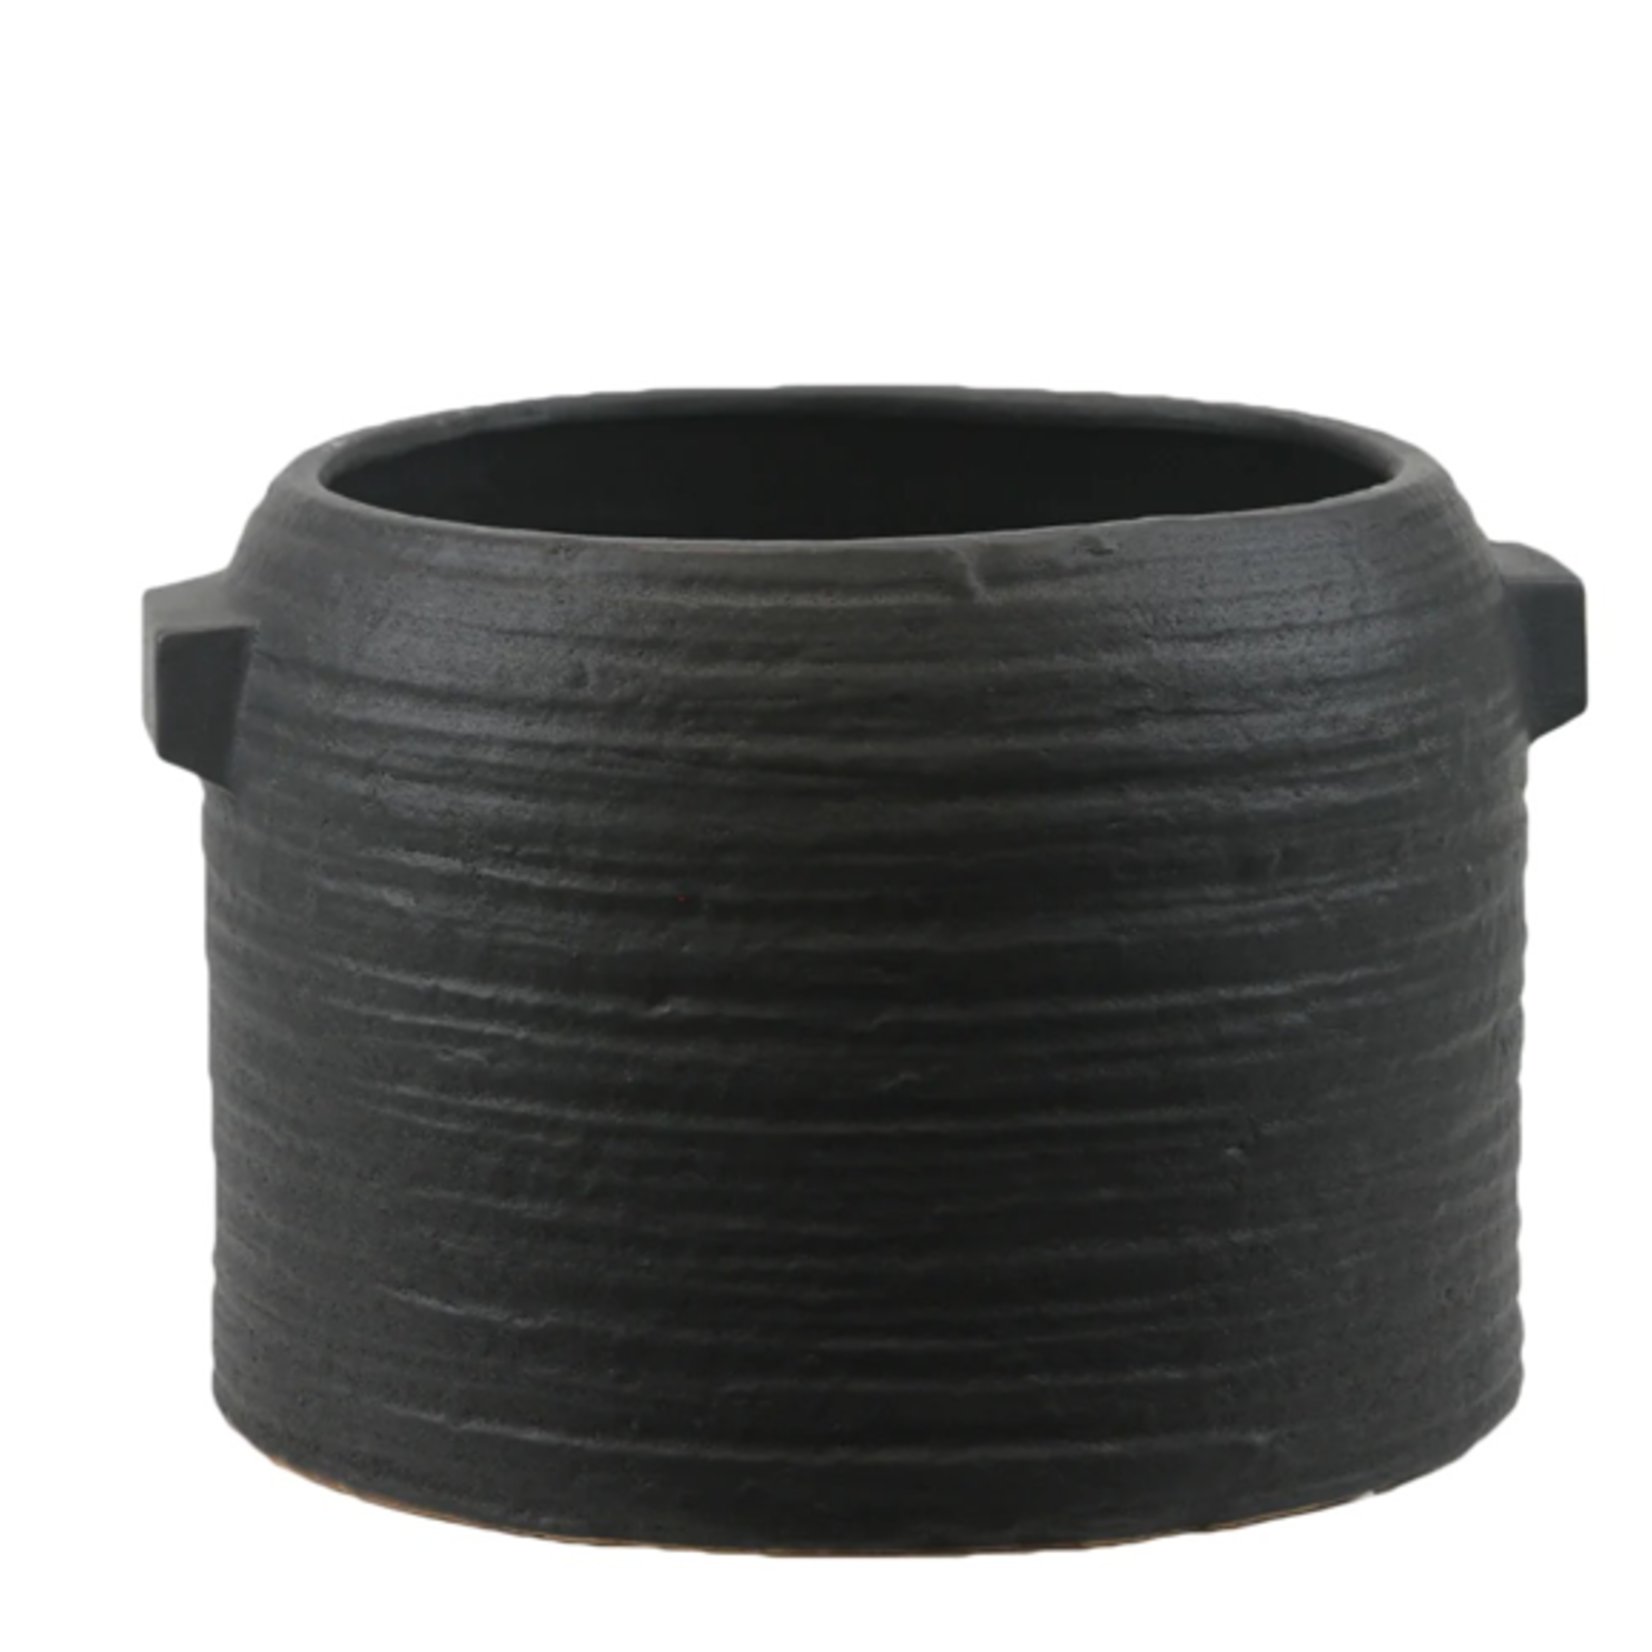 8.5”H X 12.5” BLACK ZINTO LOW AND WIDE CERAMIC PLANTER WITH SMALL HANDLE